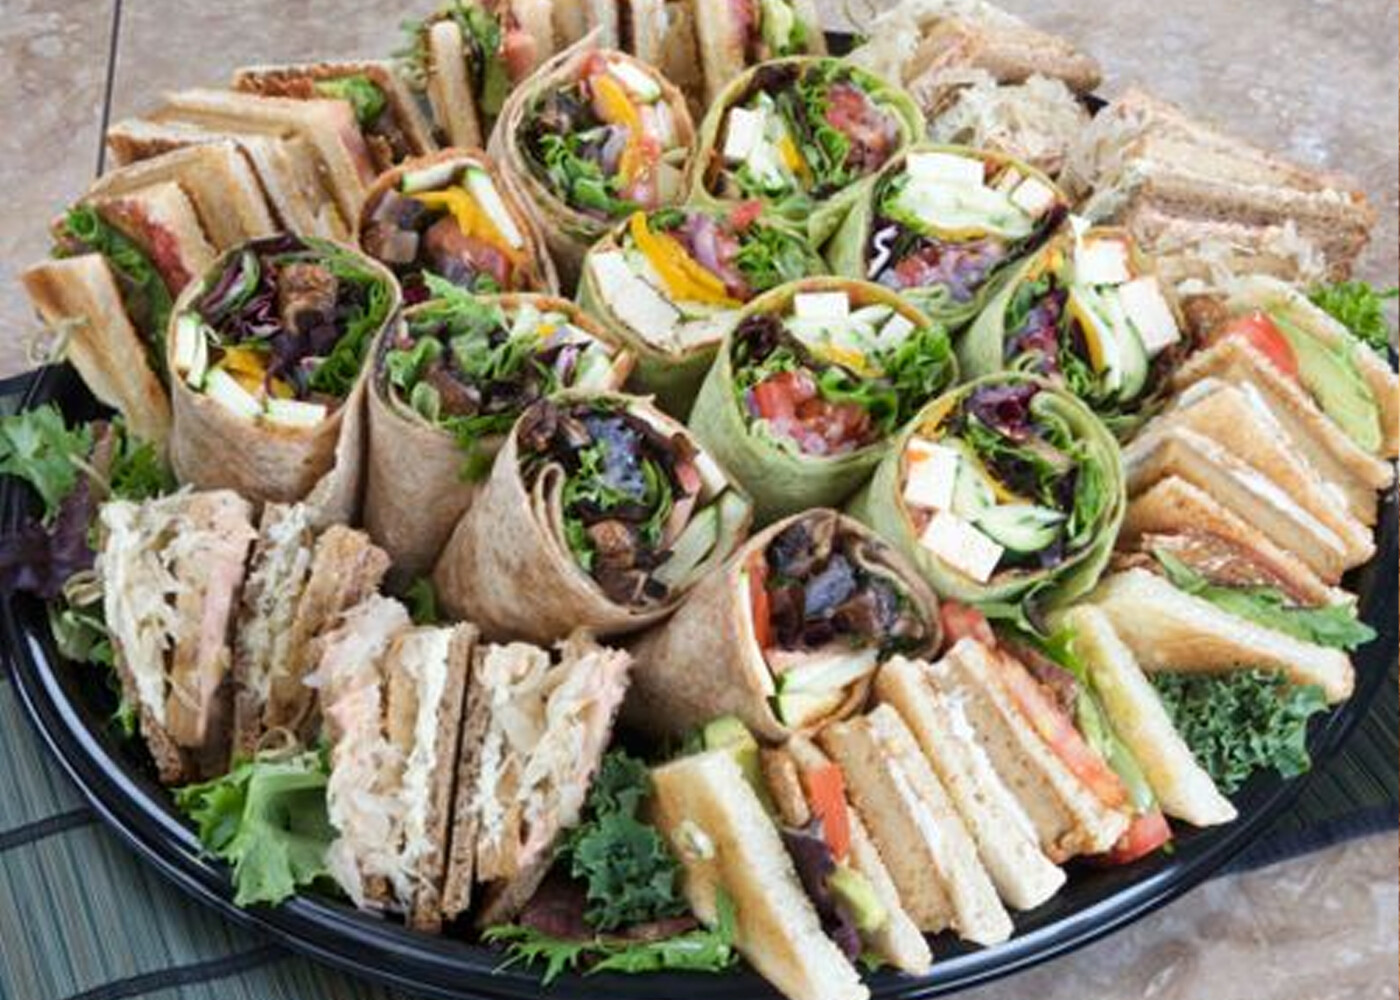 Gourmet Sandwich and Wrap Platter Package